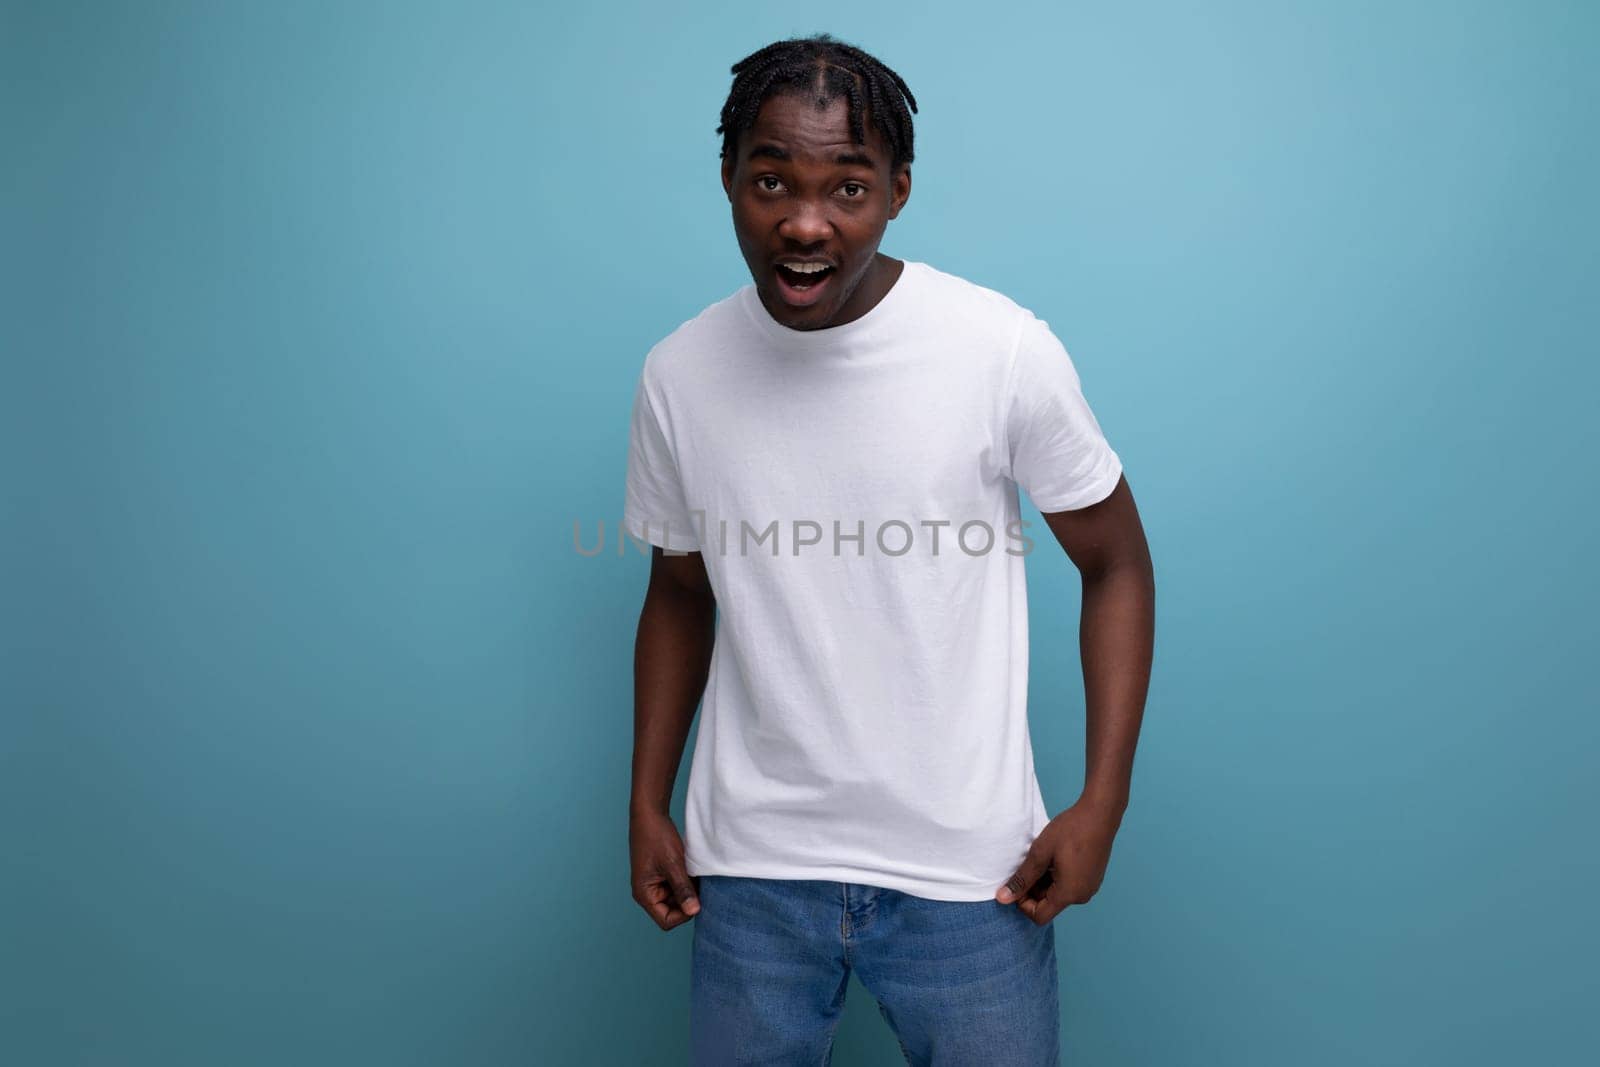 stylish young man with dreadlocks in a white t-shirt with empty space for logo.